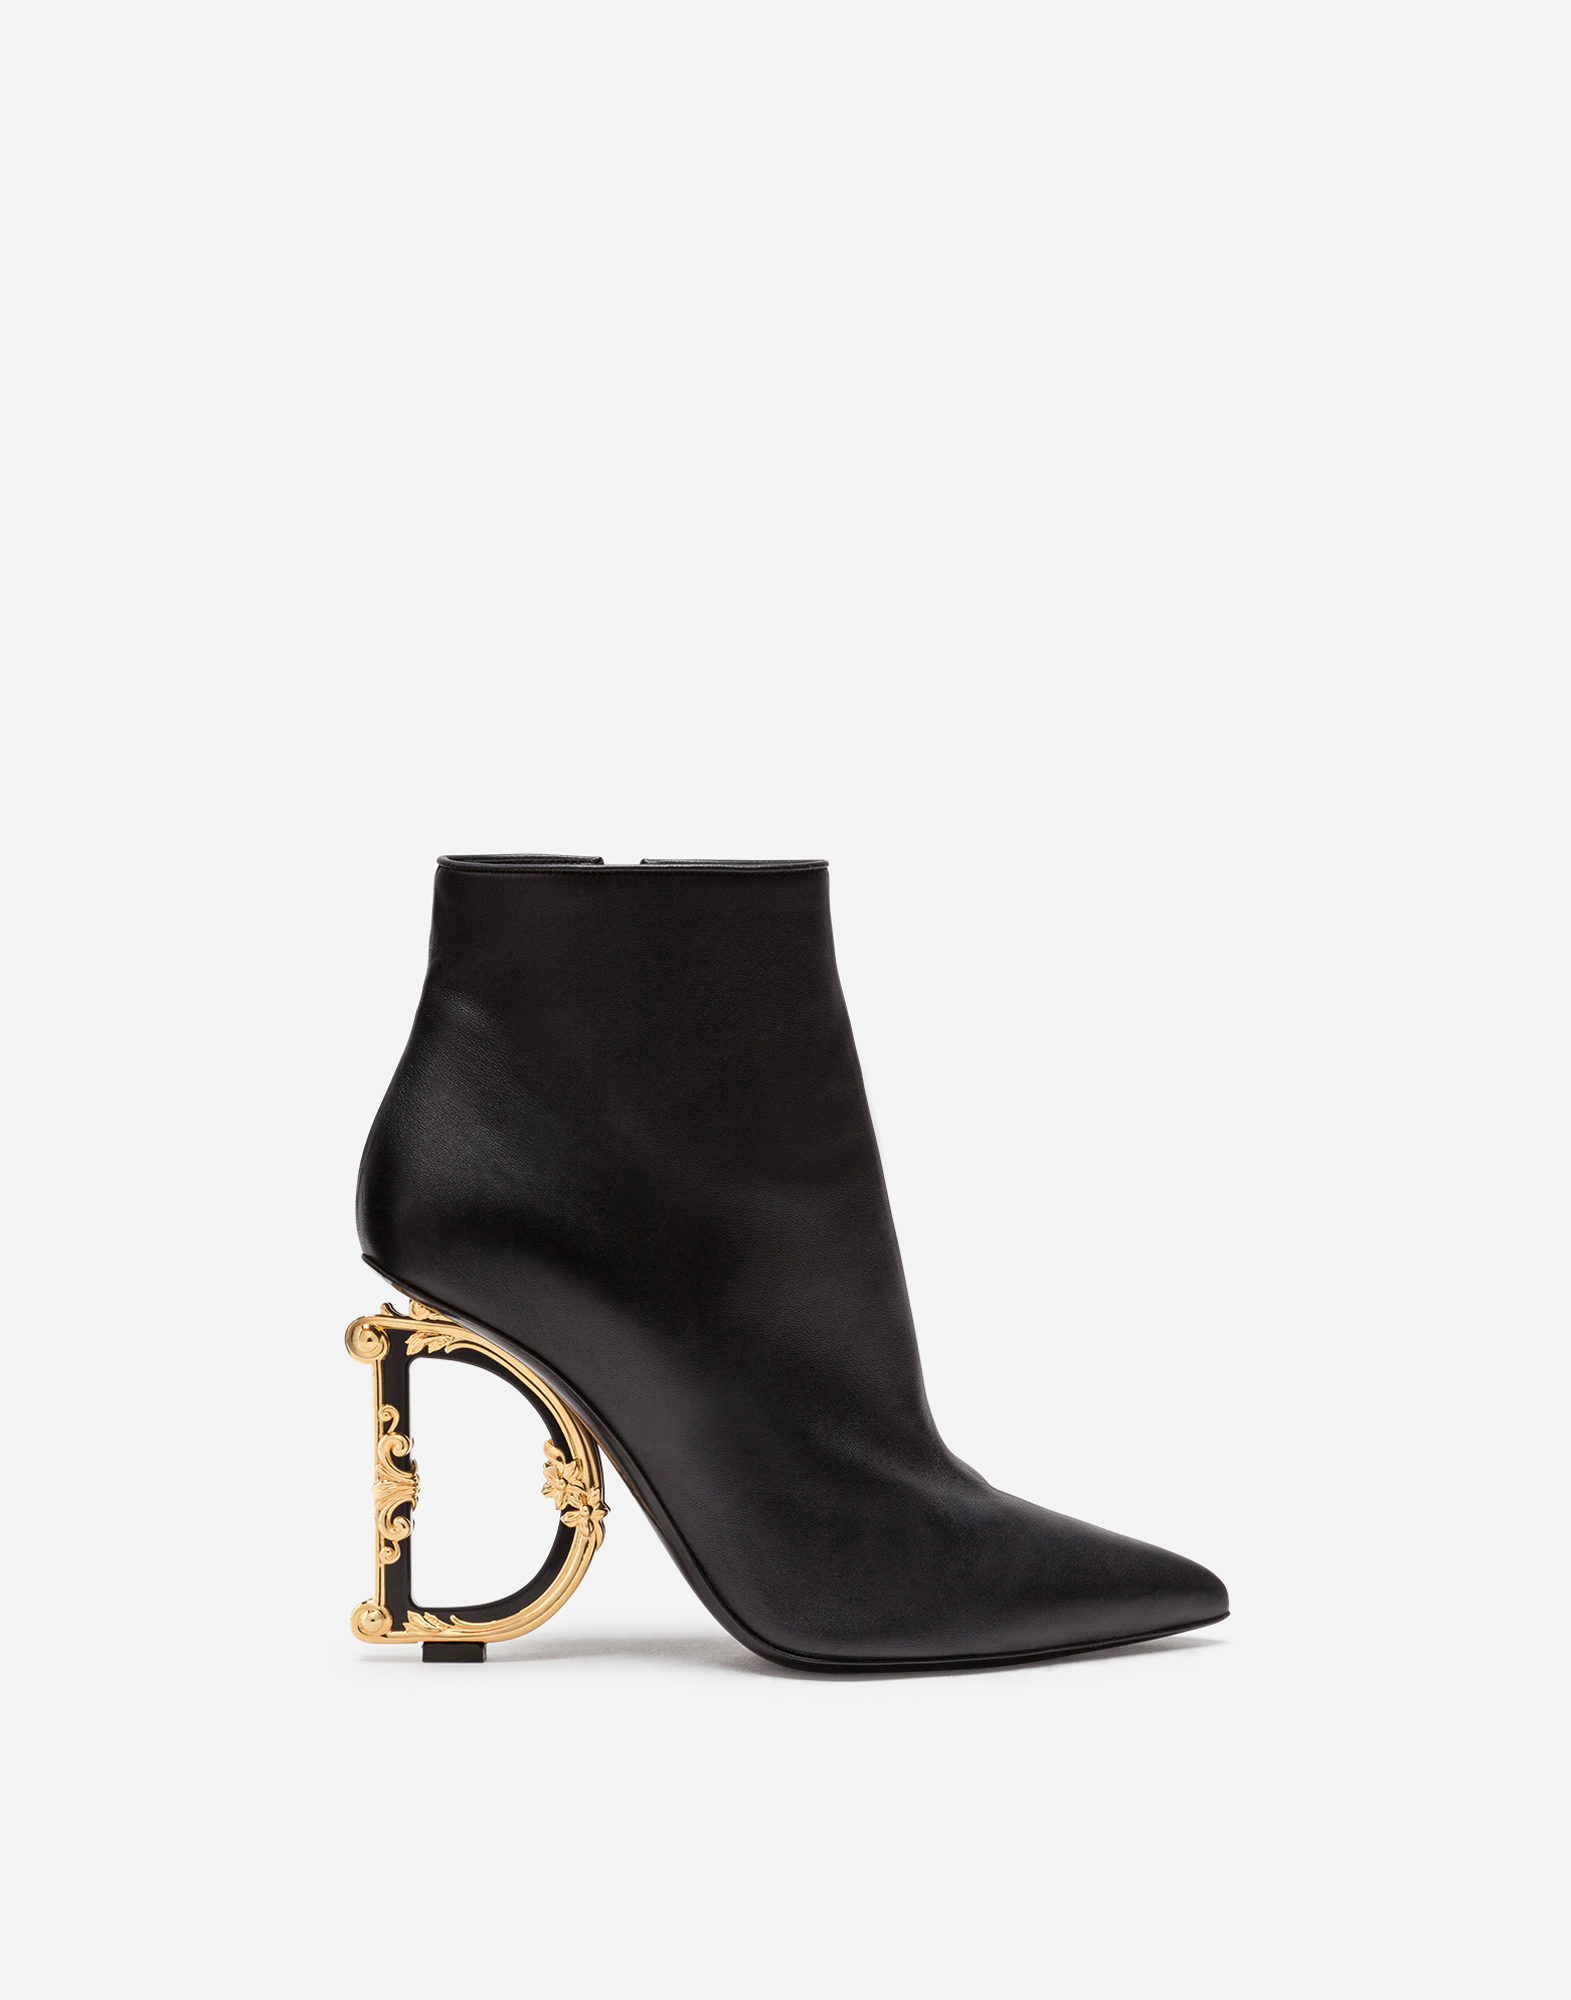 Nappa leather ankle boots with baroque DG detail in Black